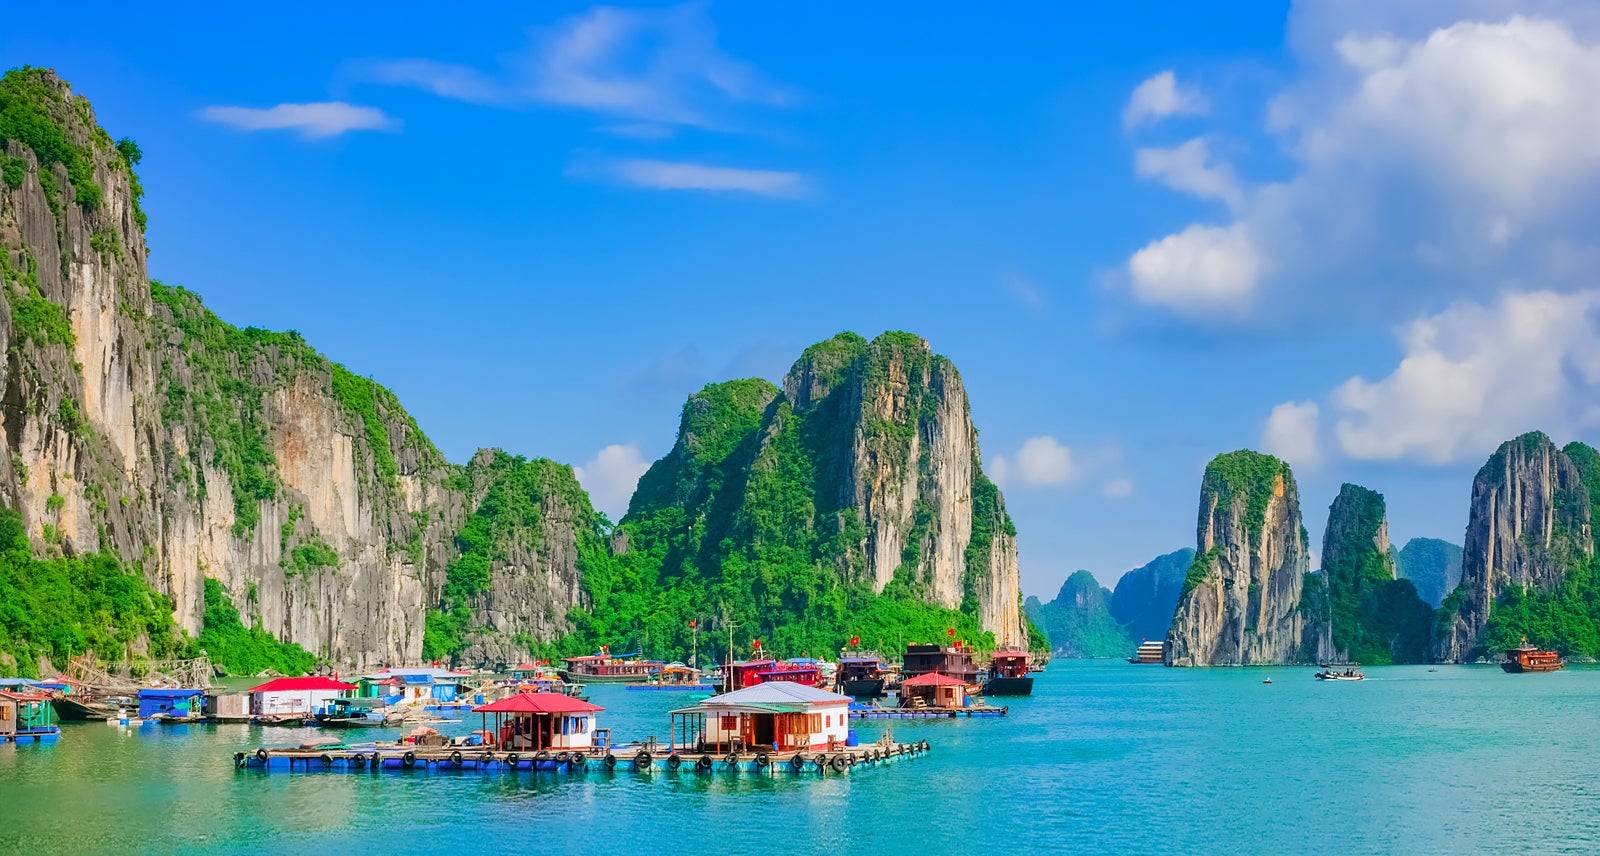 Vietnam is ranked in the world’s top 5 summer destinations for 2023